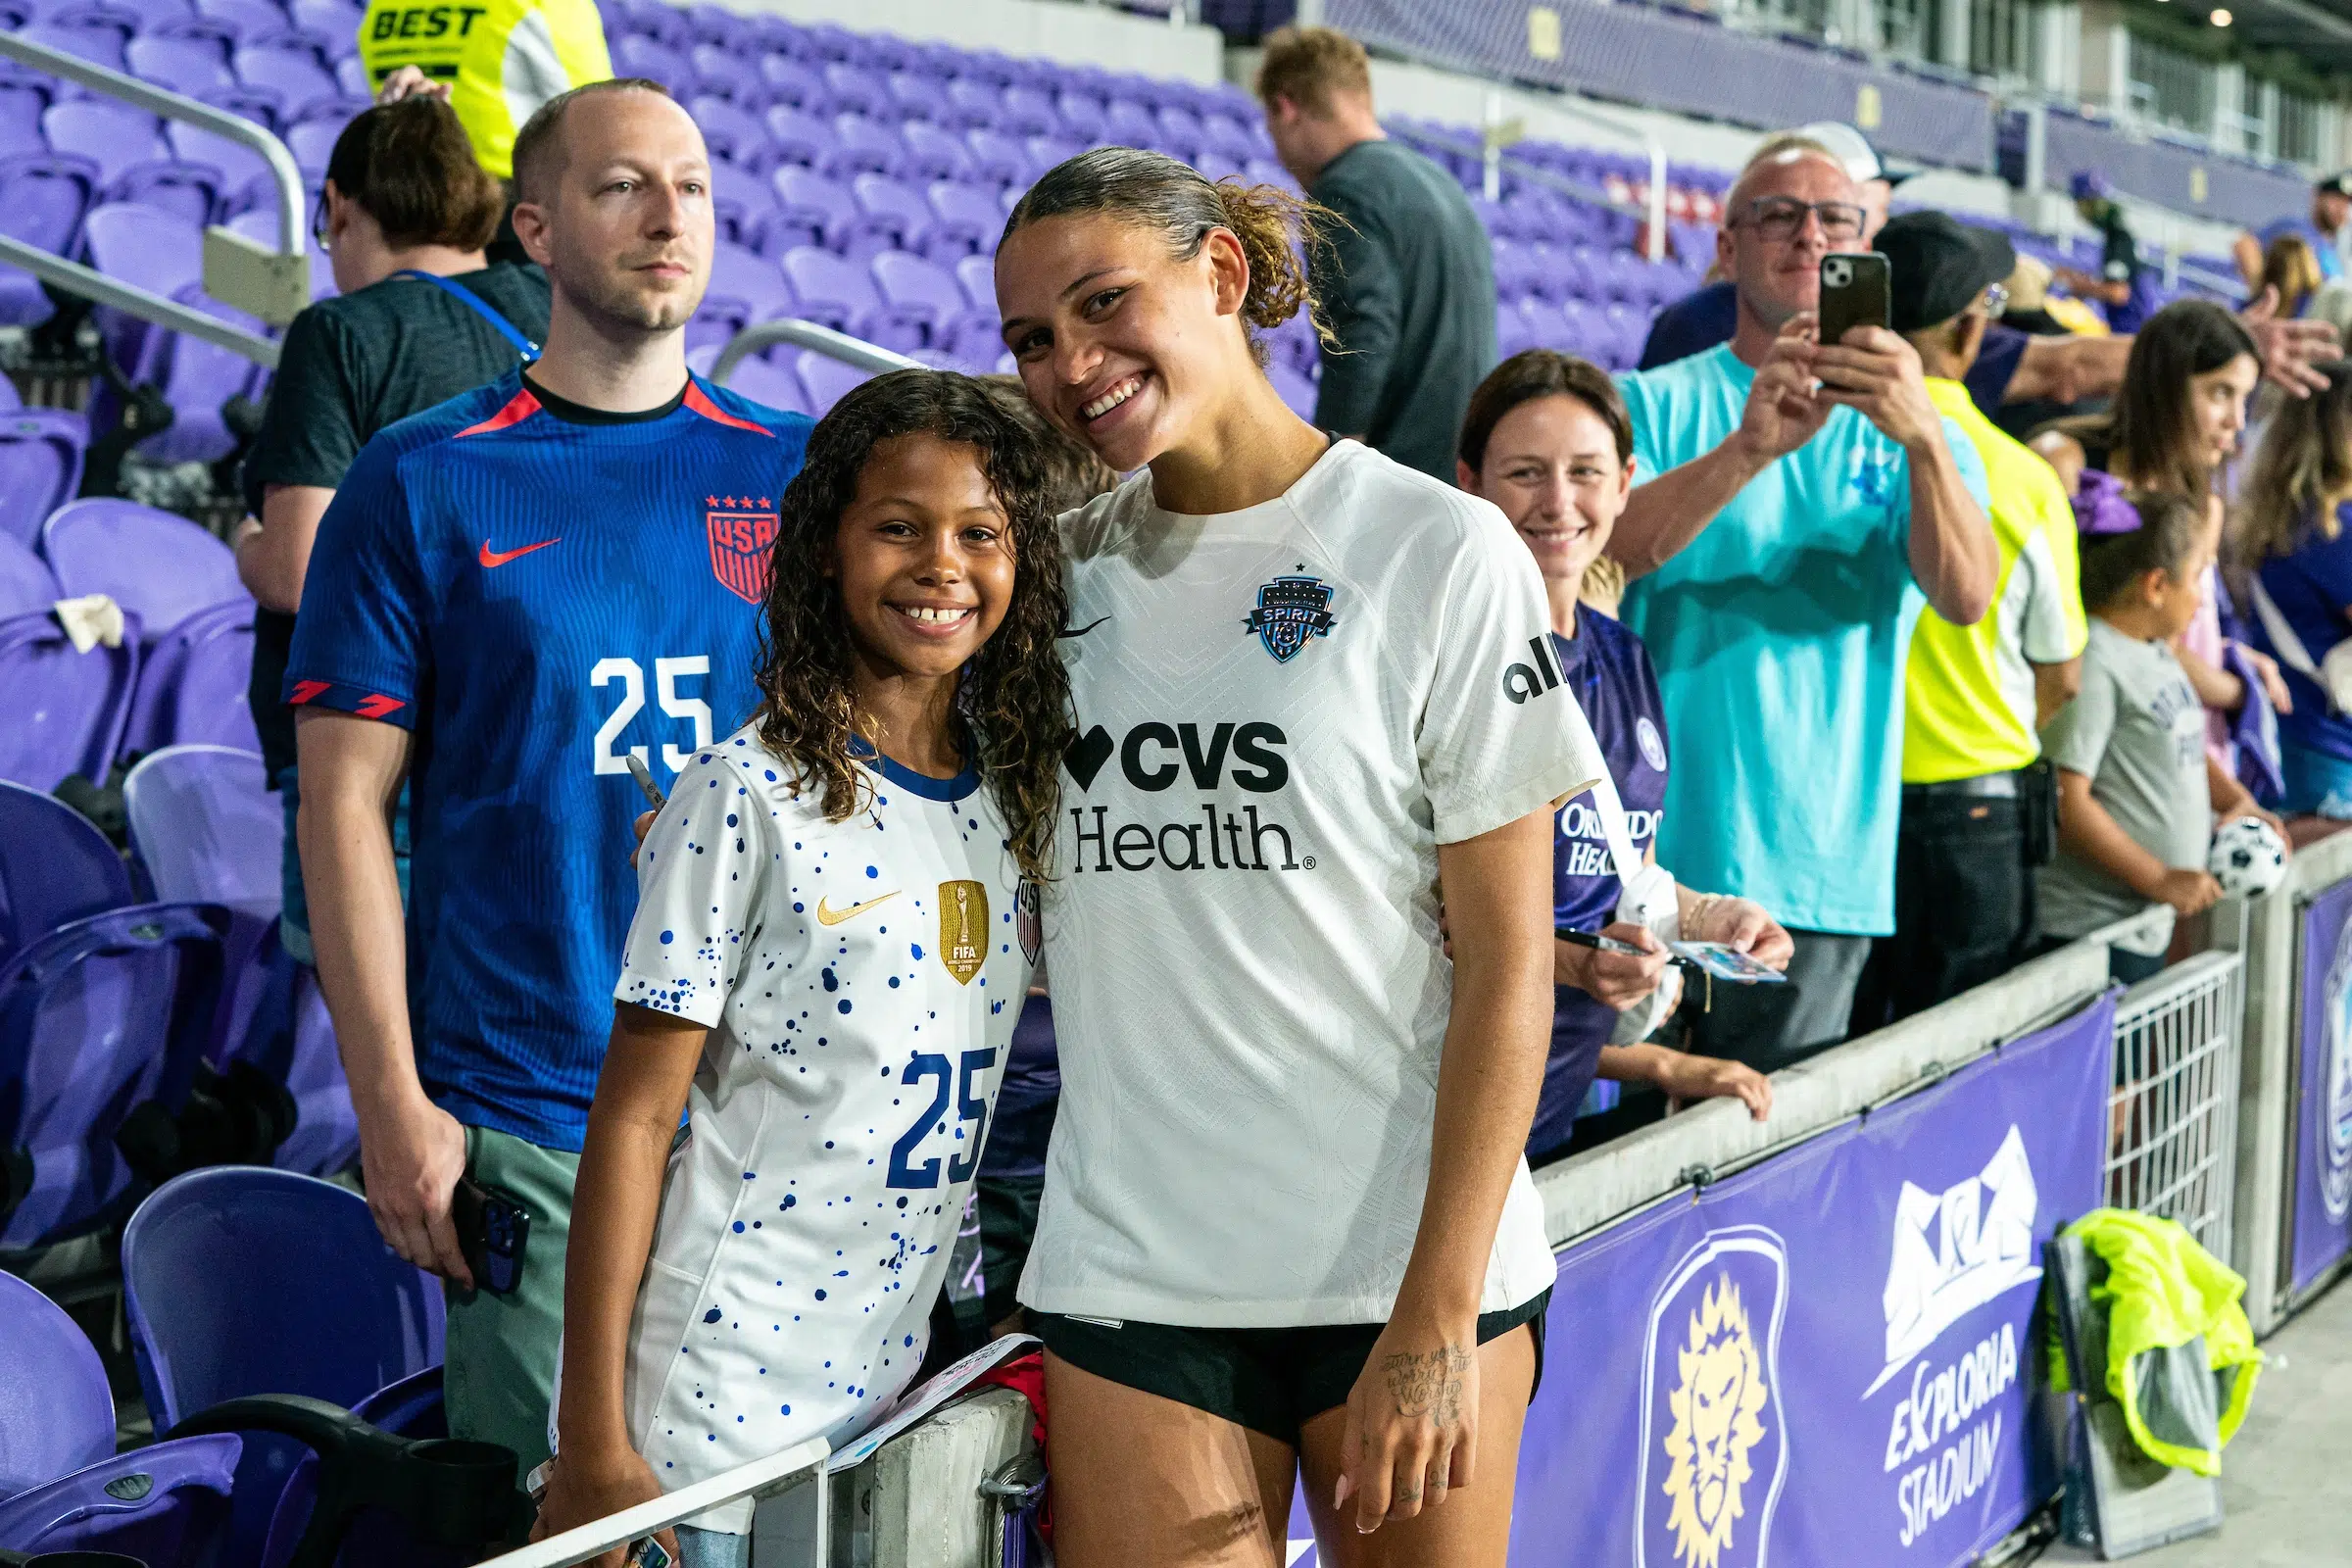 Trinity Rodman smiles and poses with a young fan. Rodman is wearing a white top and black shorts. The young fan is wearing a white USWNT jersey speckled with blue.